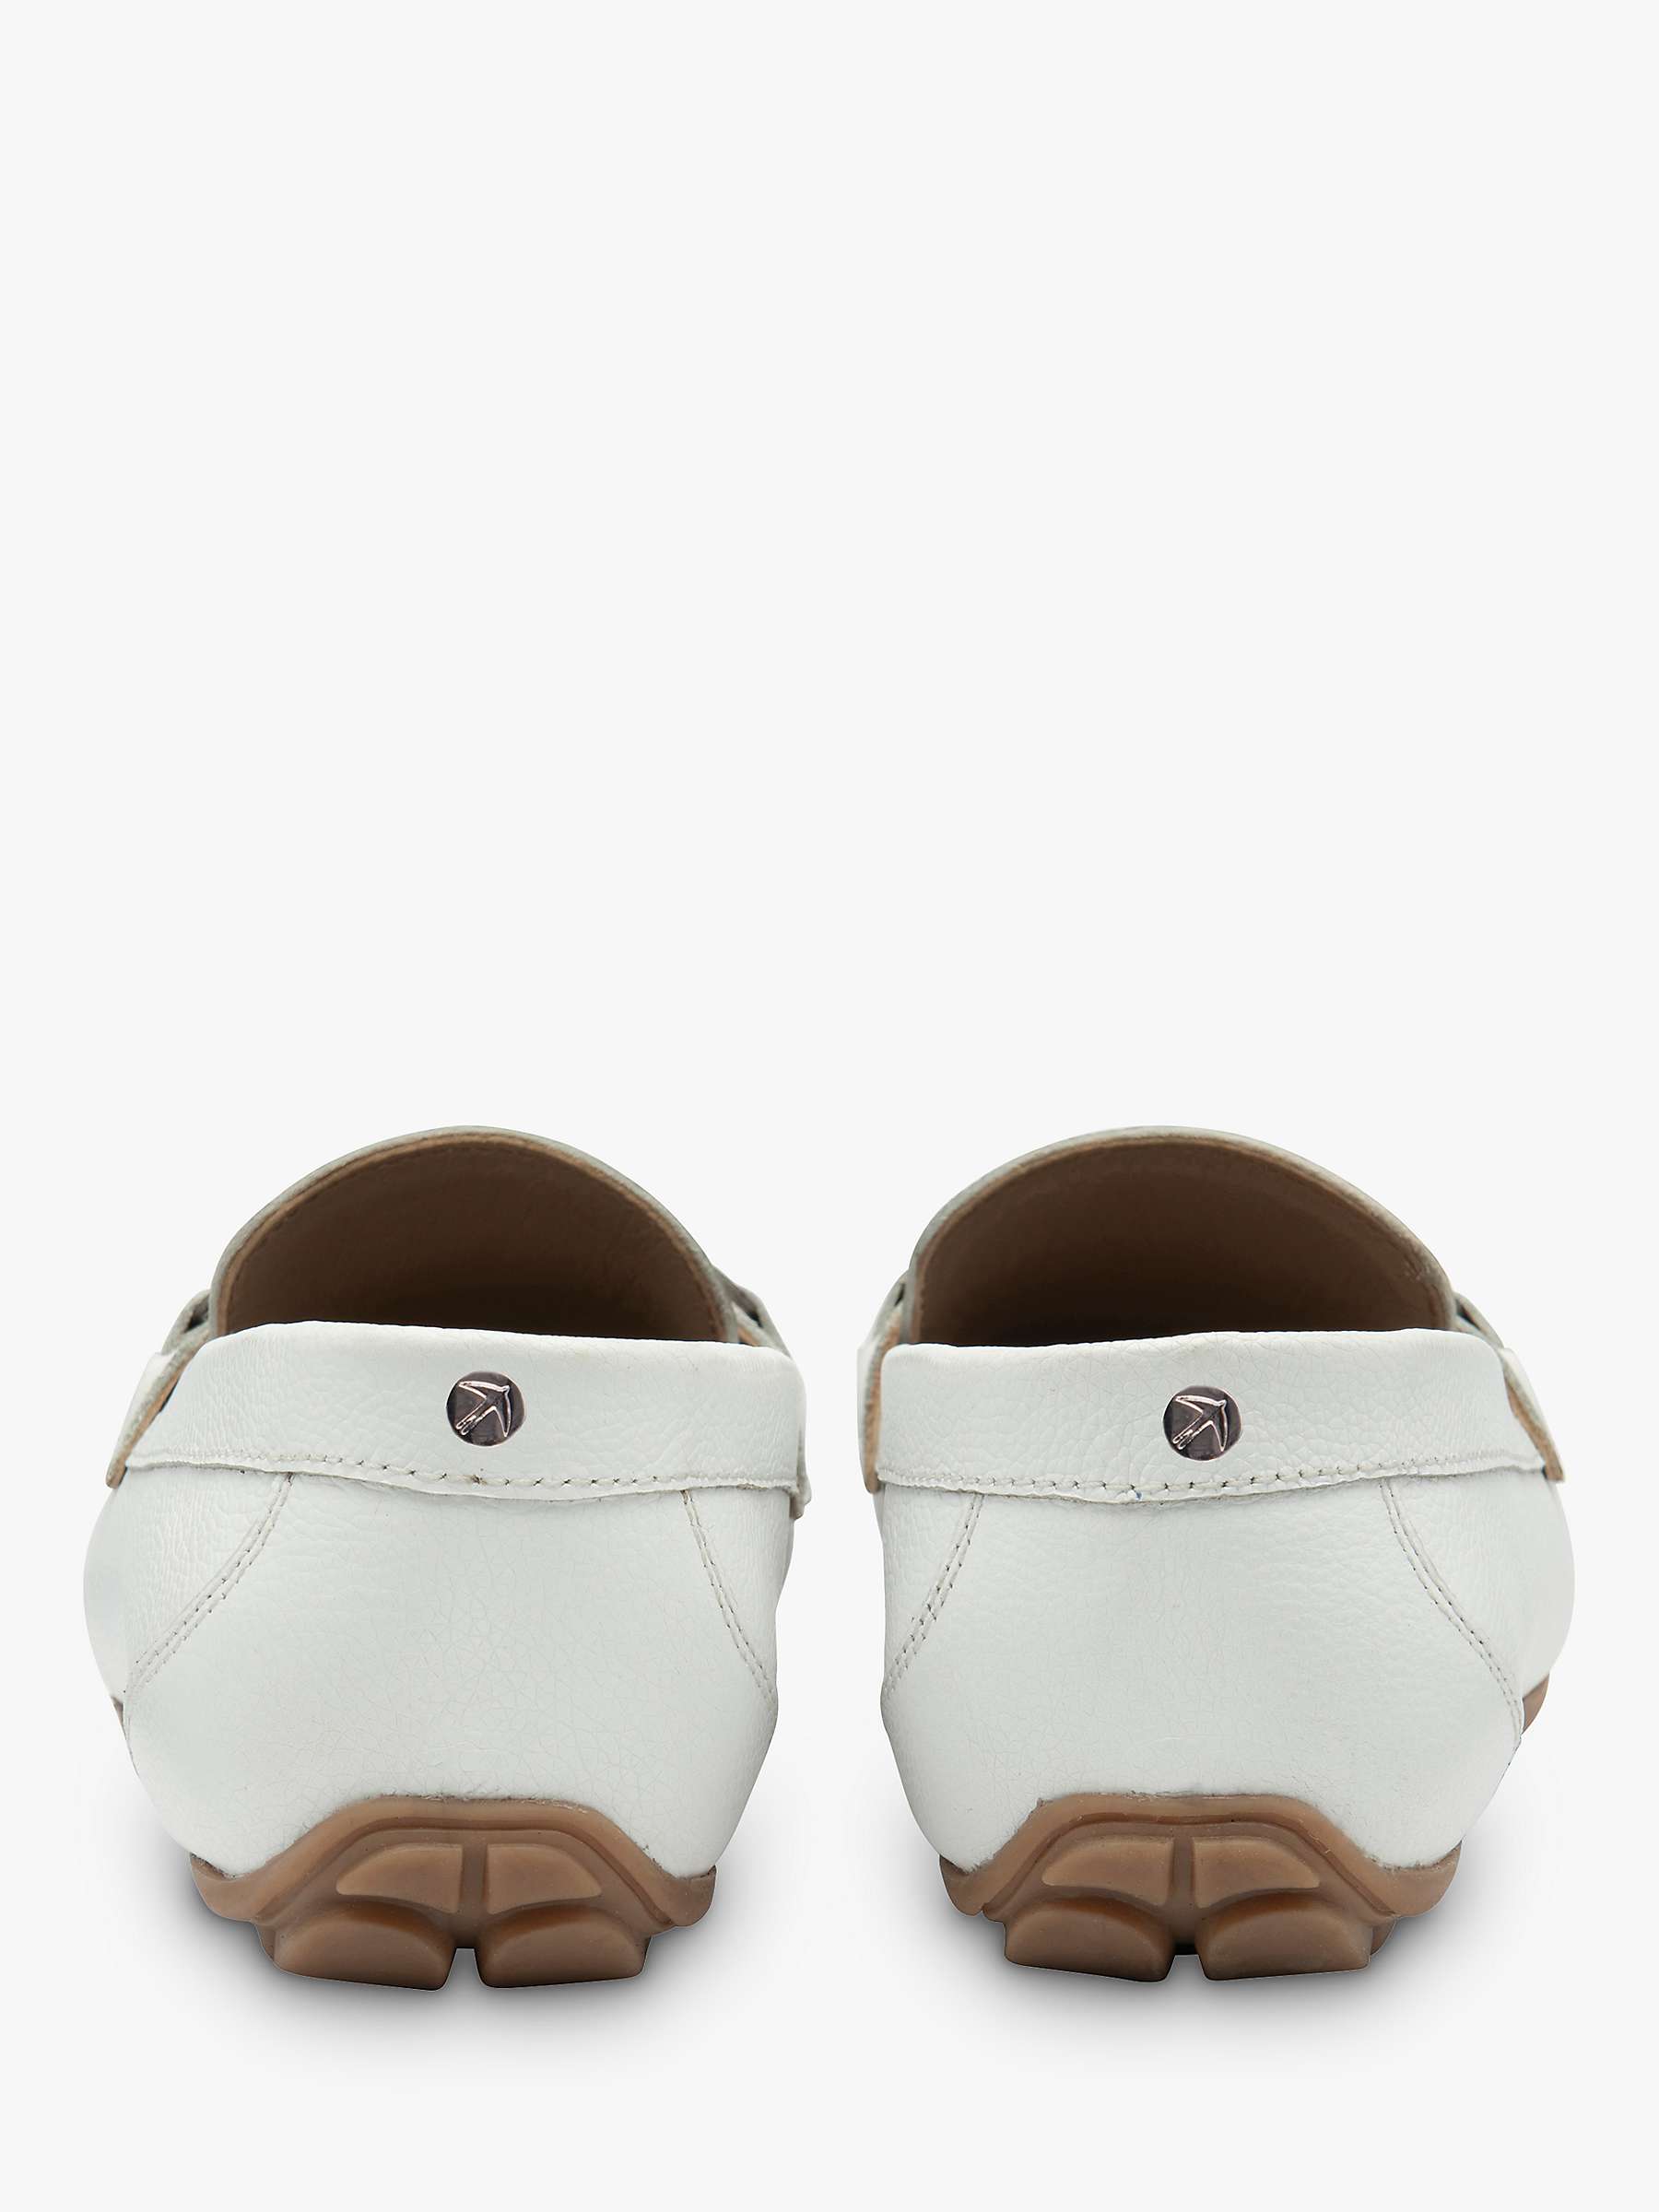 Buy Ravel Dutton Leather Loafers Online at johnlewis.com